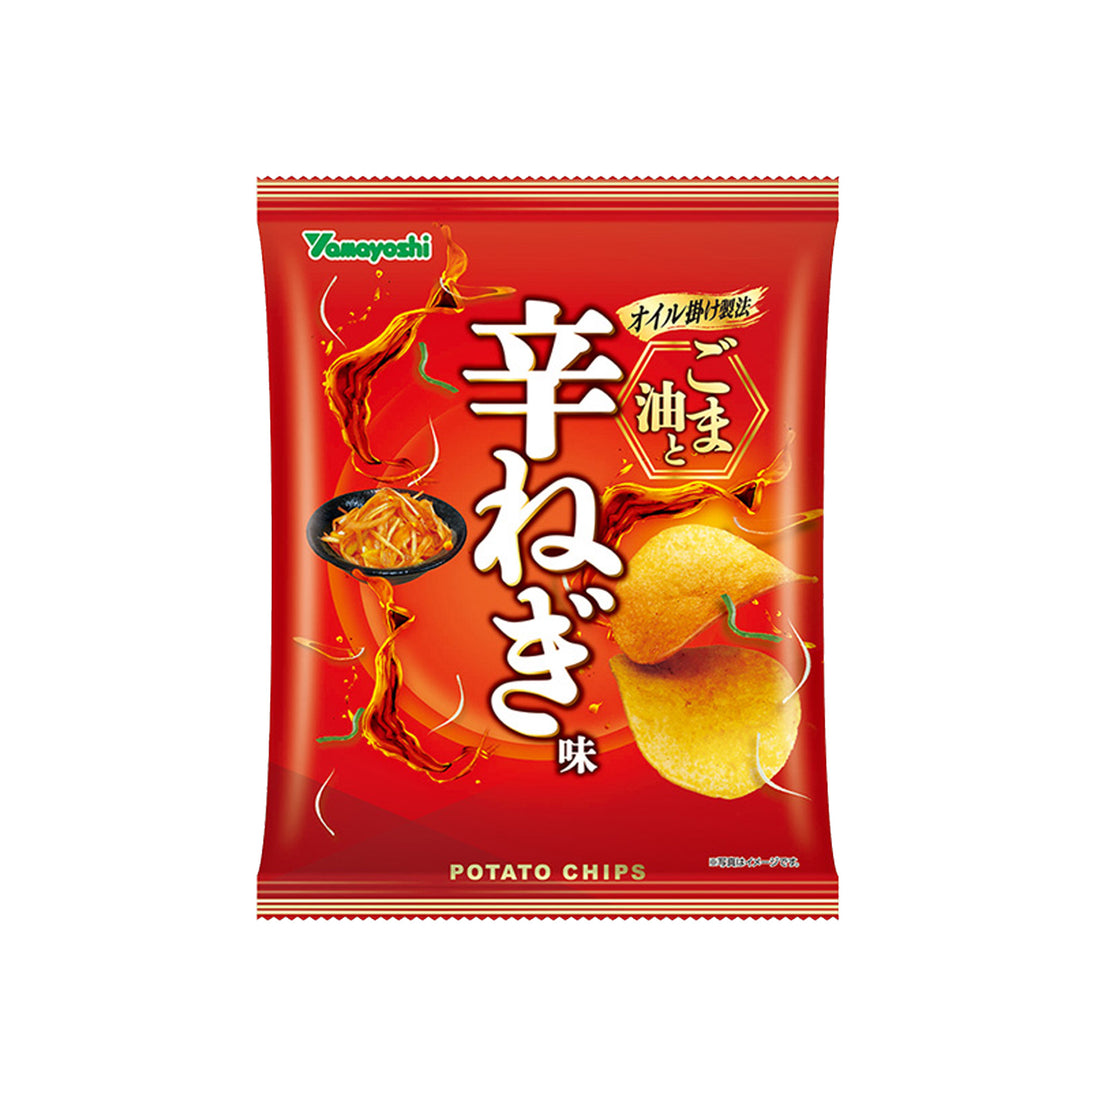 Yamayoshi Potato Chips - Sesame Oil And Spicy Green Onion Flavor 53g